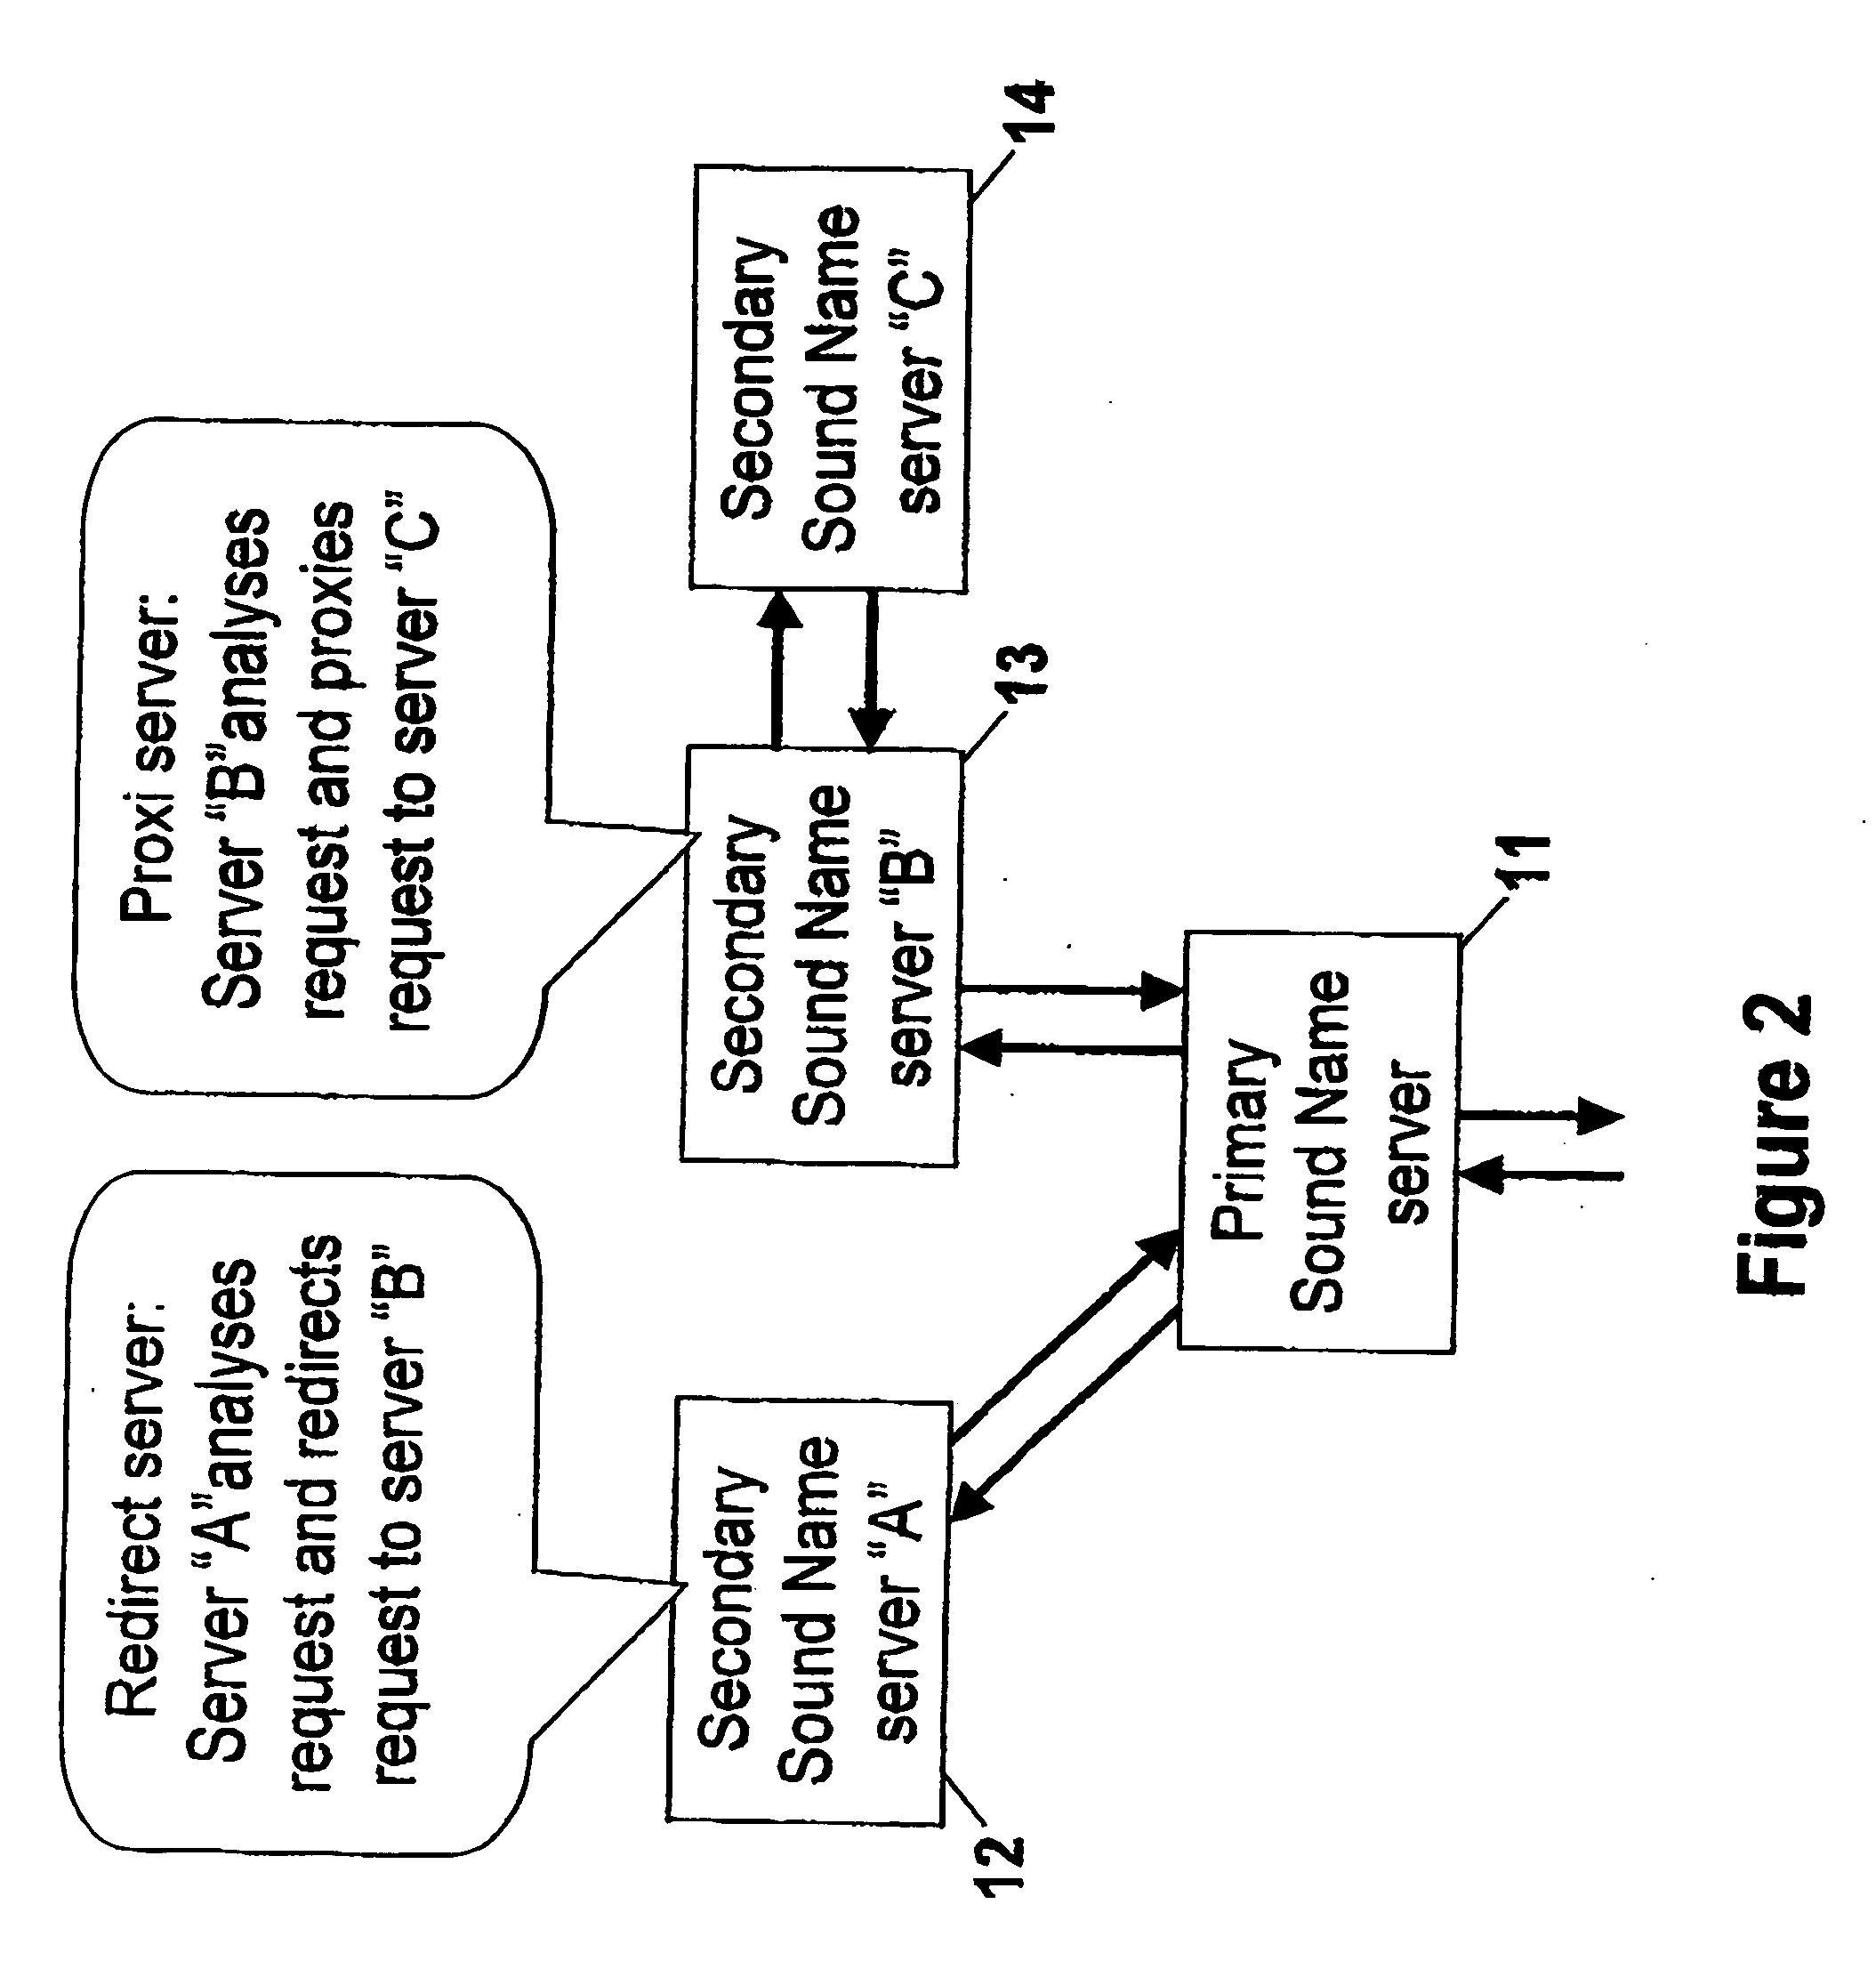 System and method for hierarchical voice actived dialling and service selection